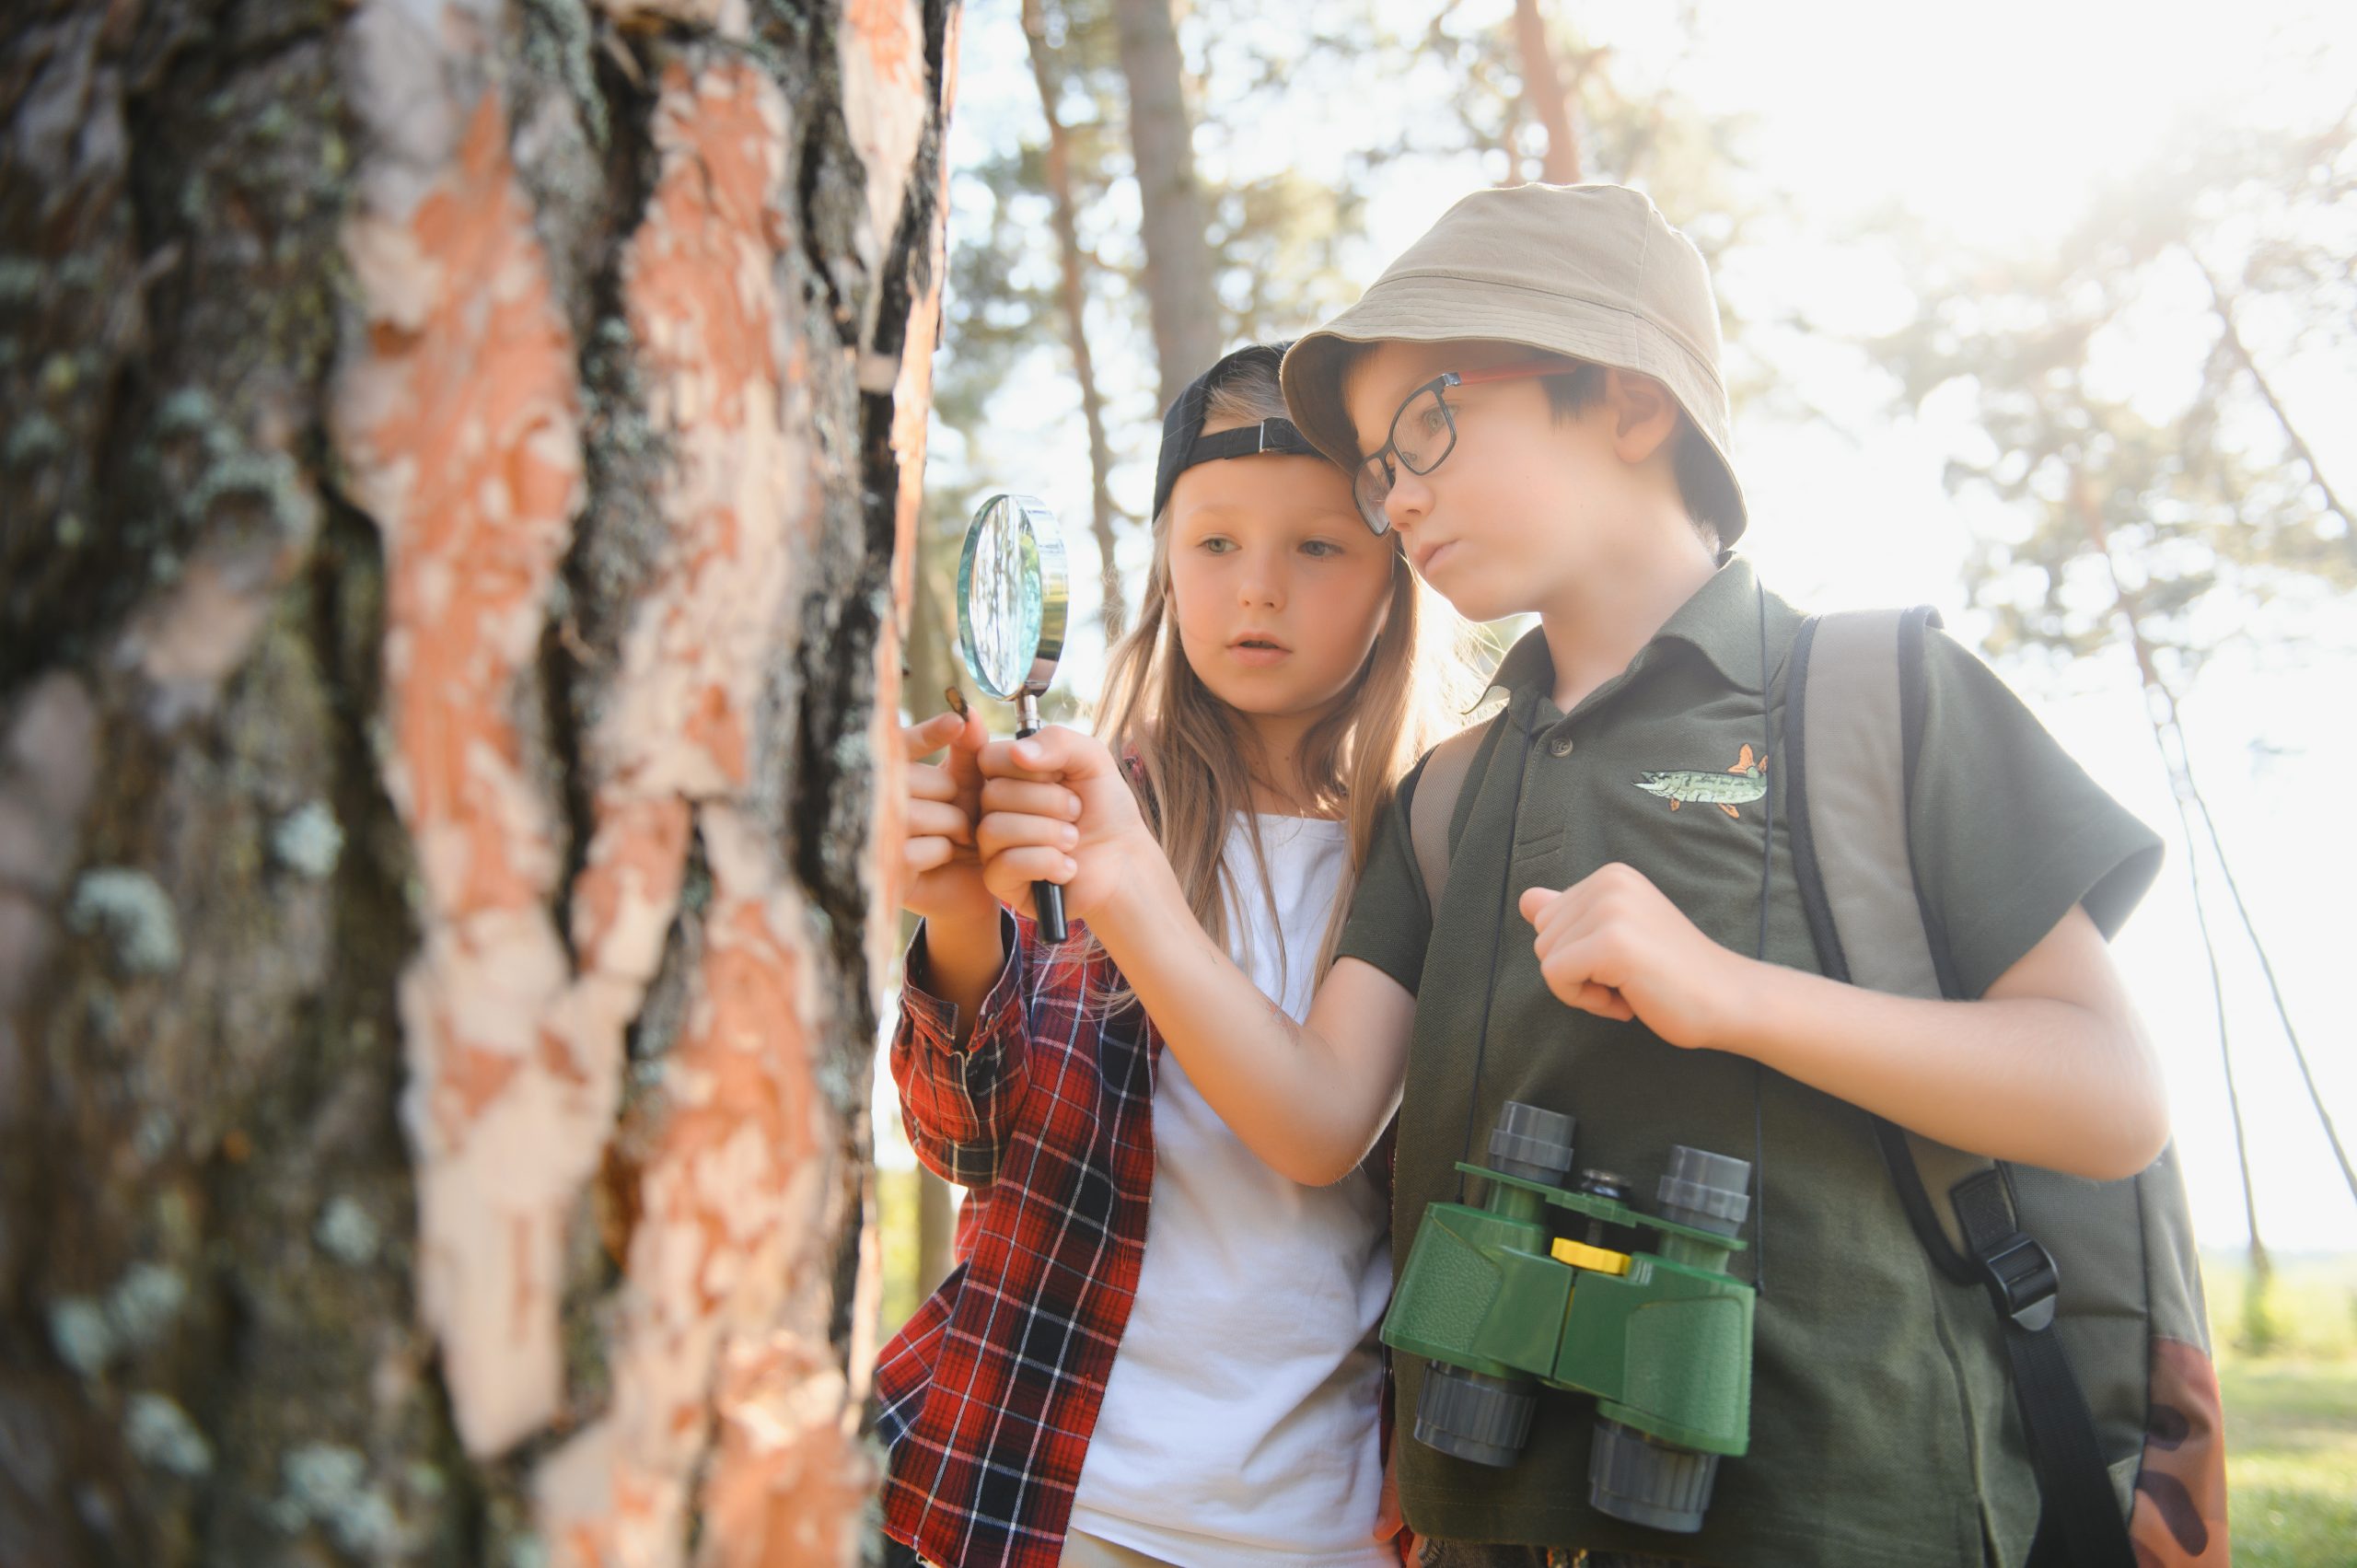 Kids exploring nature with magnifying glass. Summer activity for inquisitive child